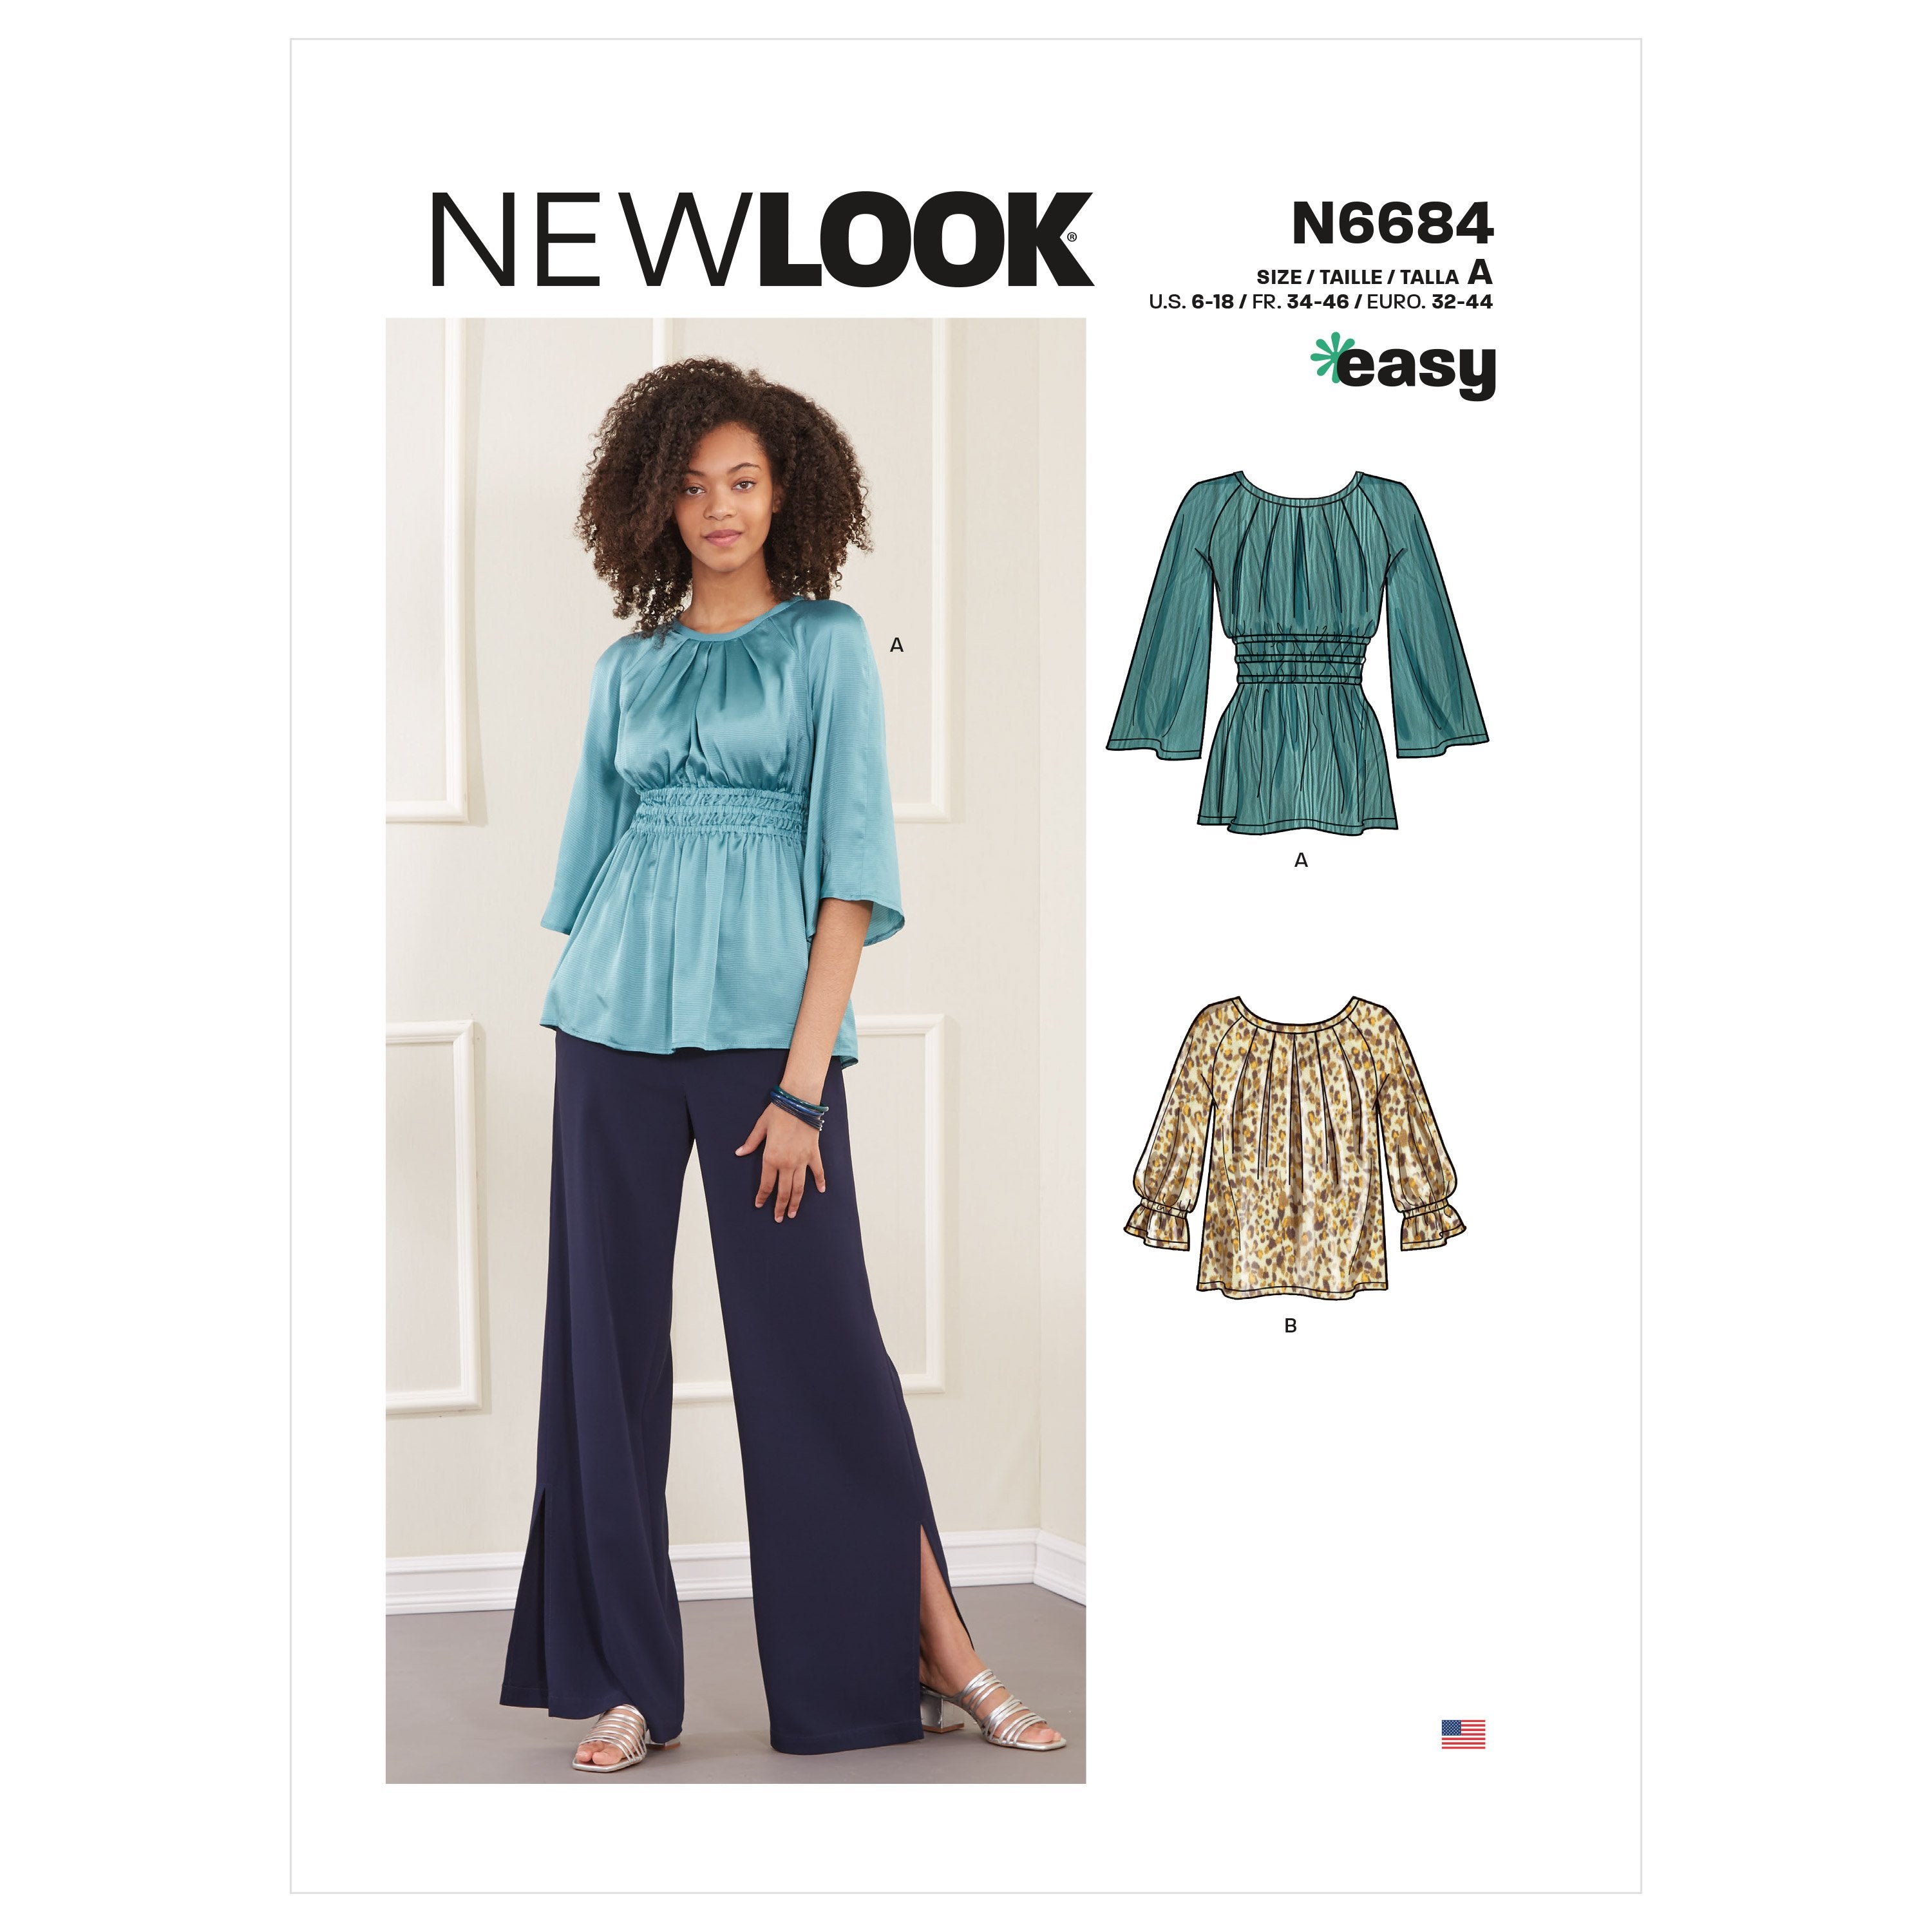 New Look Sewing Pattern 6684 Tops In Two Lengths from Jaycotts Sewing Supplies